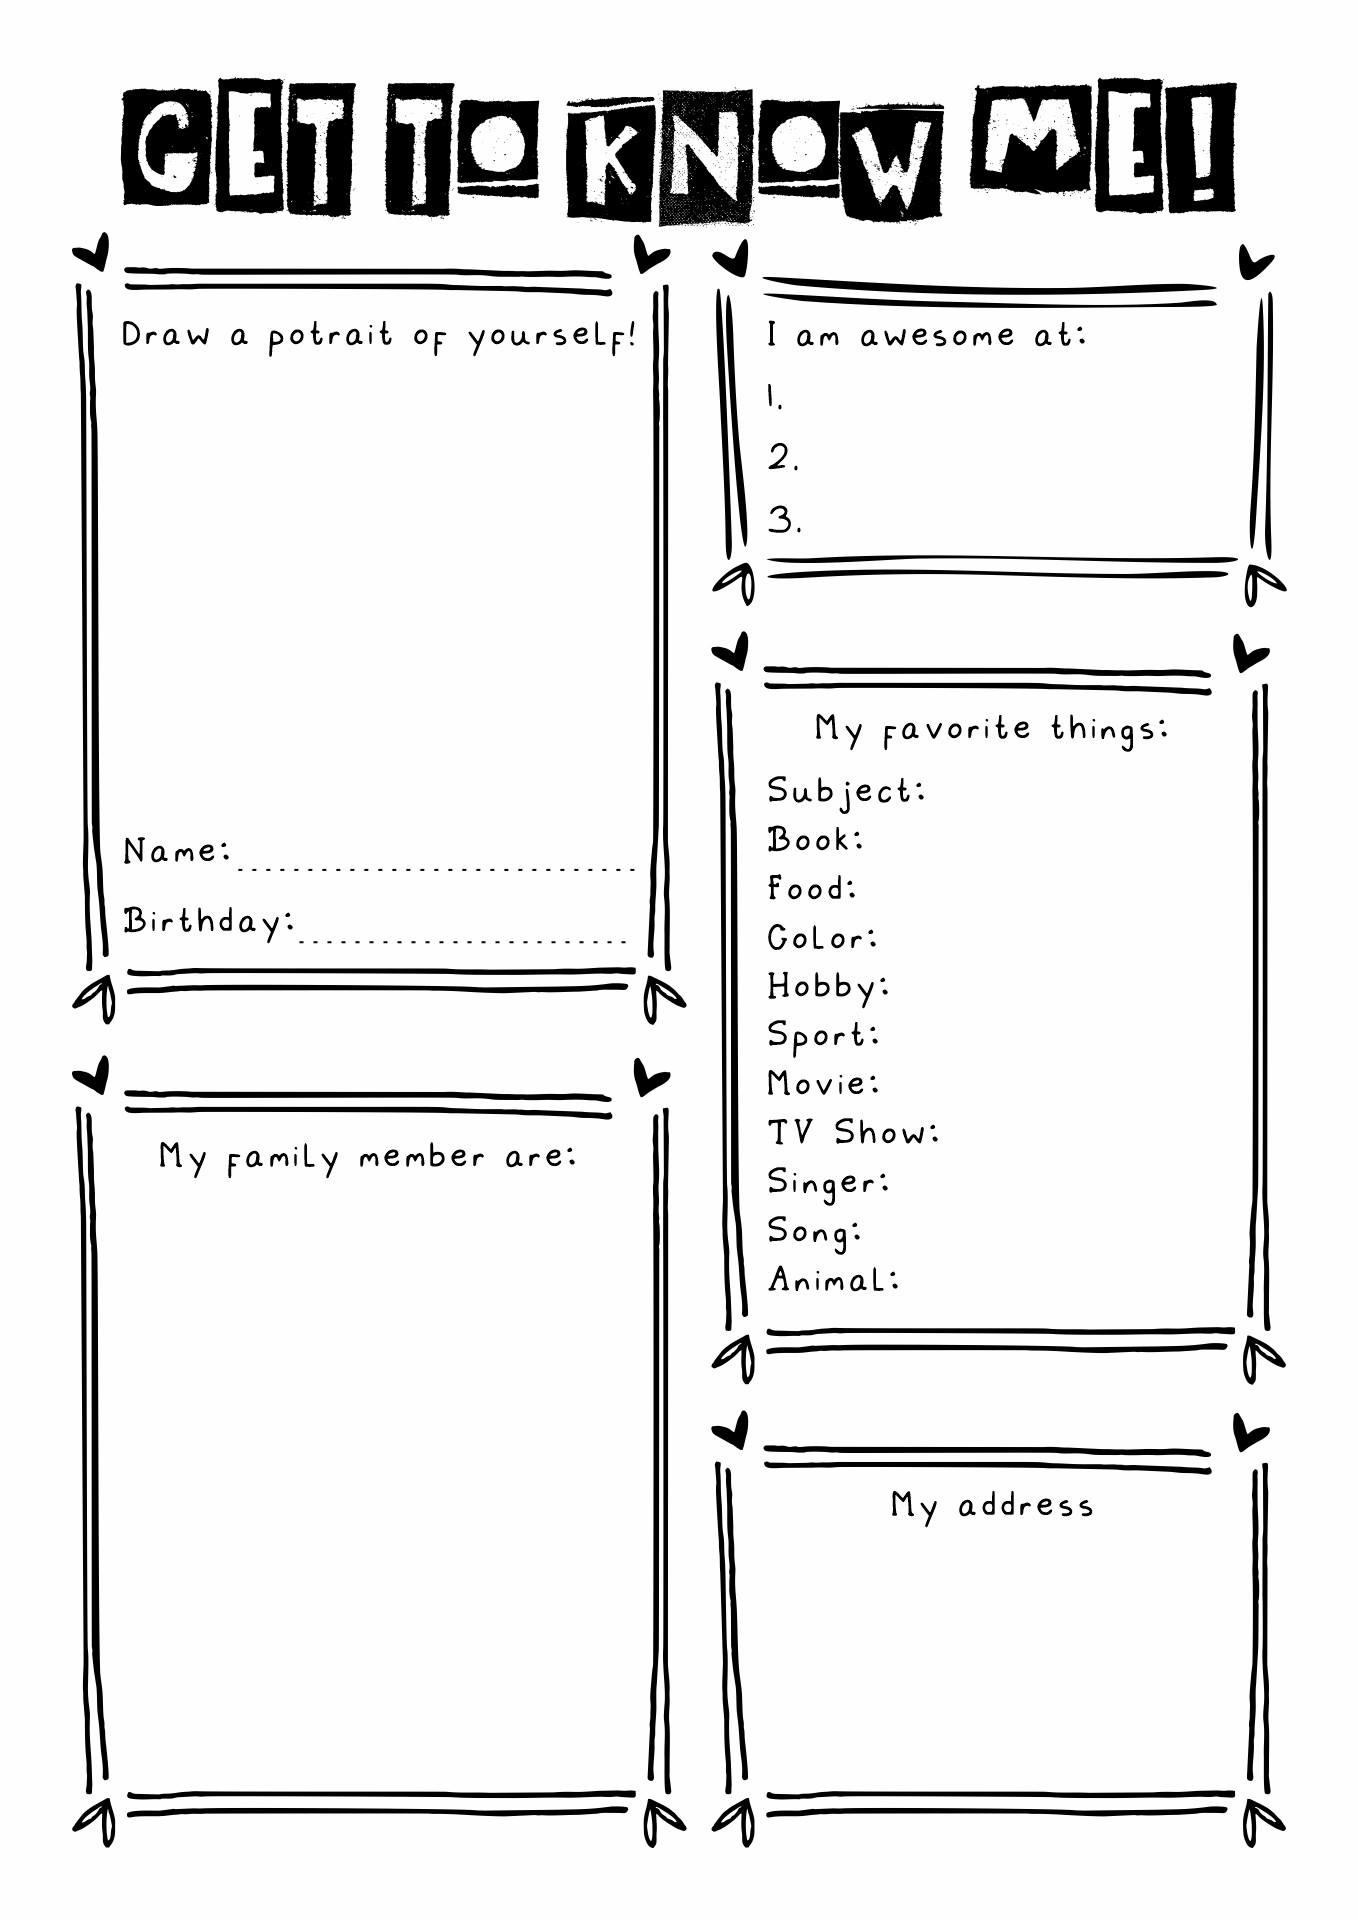 All About Me Ice Breaker Worksheet